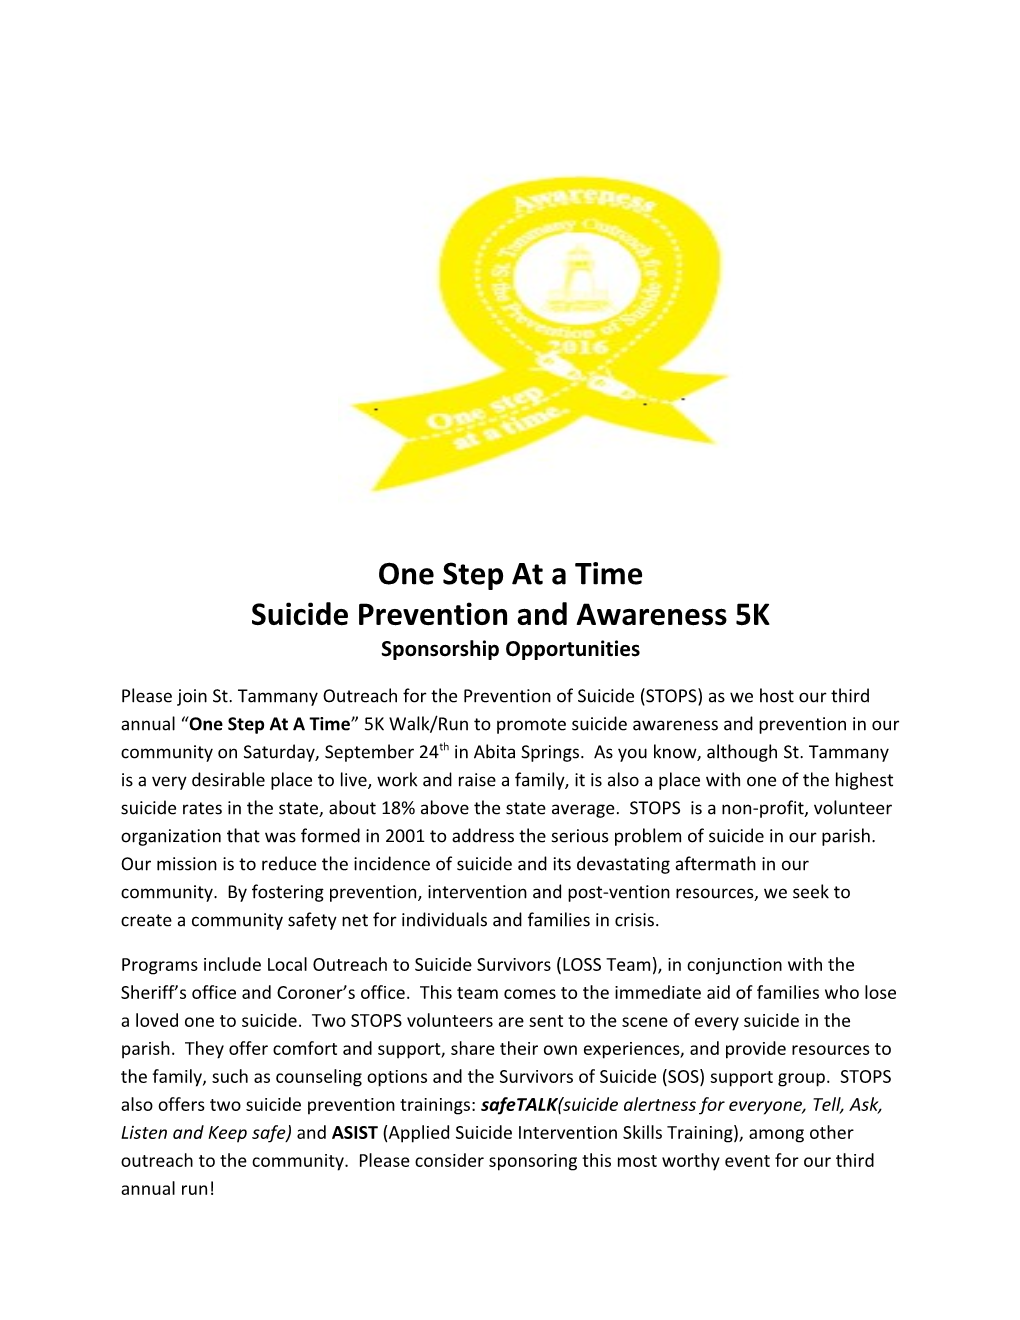 Suicide Prevention and Awareness 5K